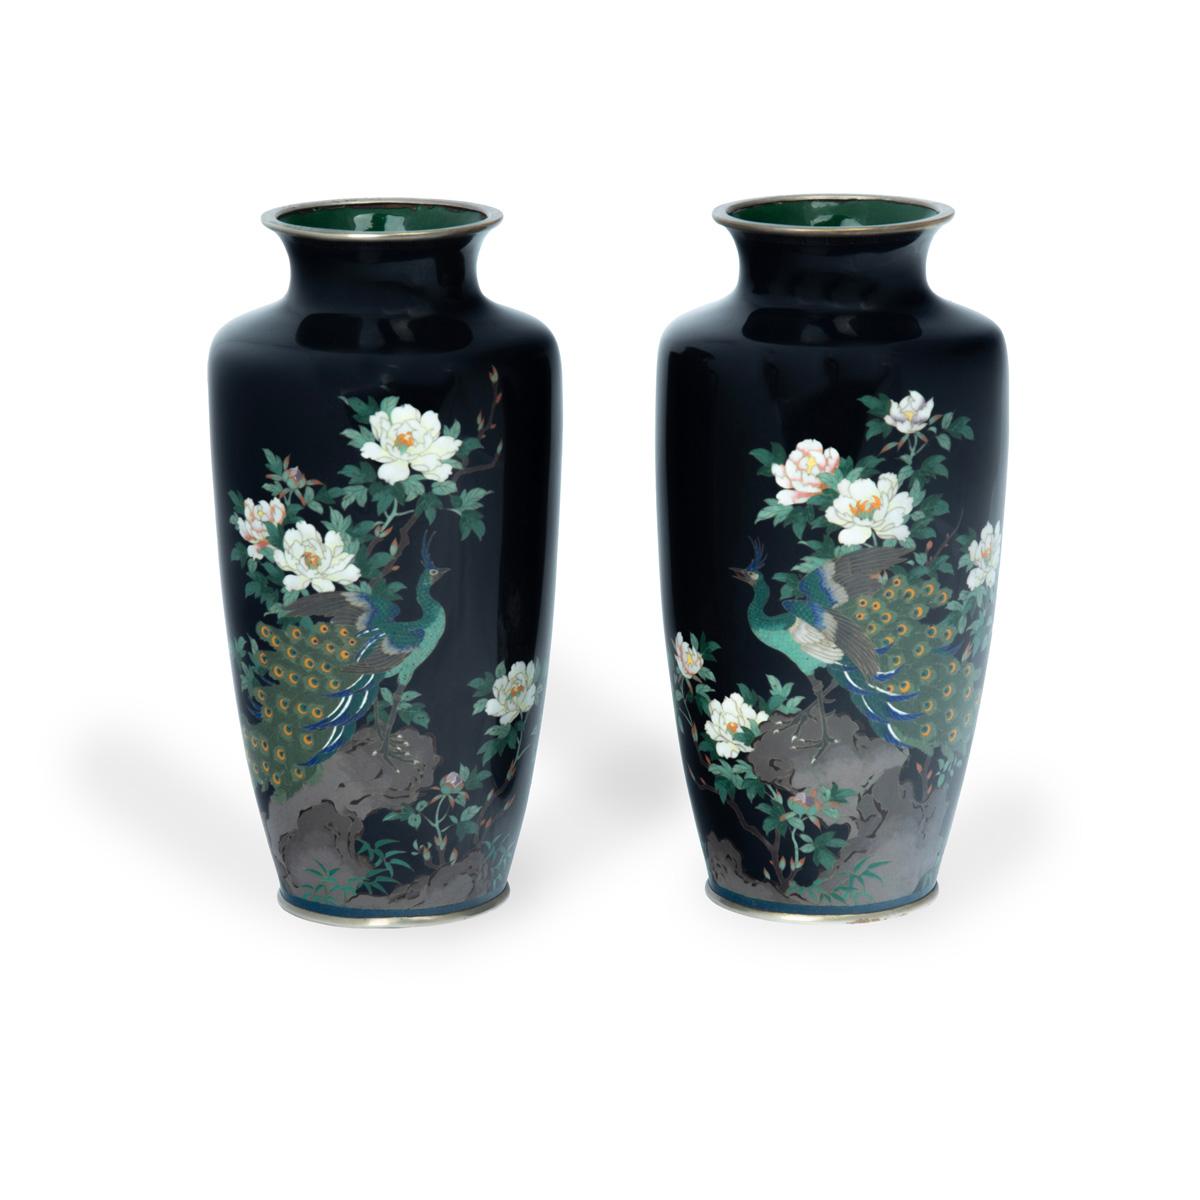 A pair of Meiji period blue cloisonne vases, each with a peacock on a rocky outcrop surrounded by flowering peony plants on a dark blue ground, the peacocks facing each other, with silvered rims and in their original boxes, one rim with a small